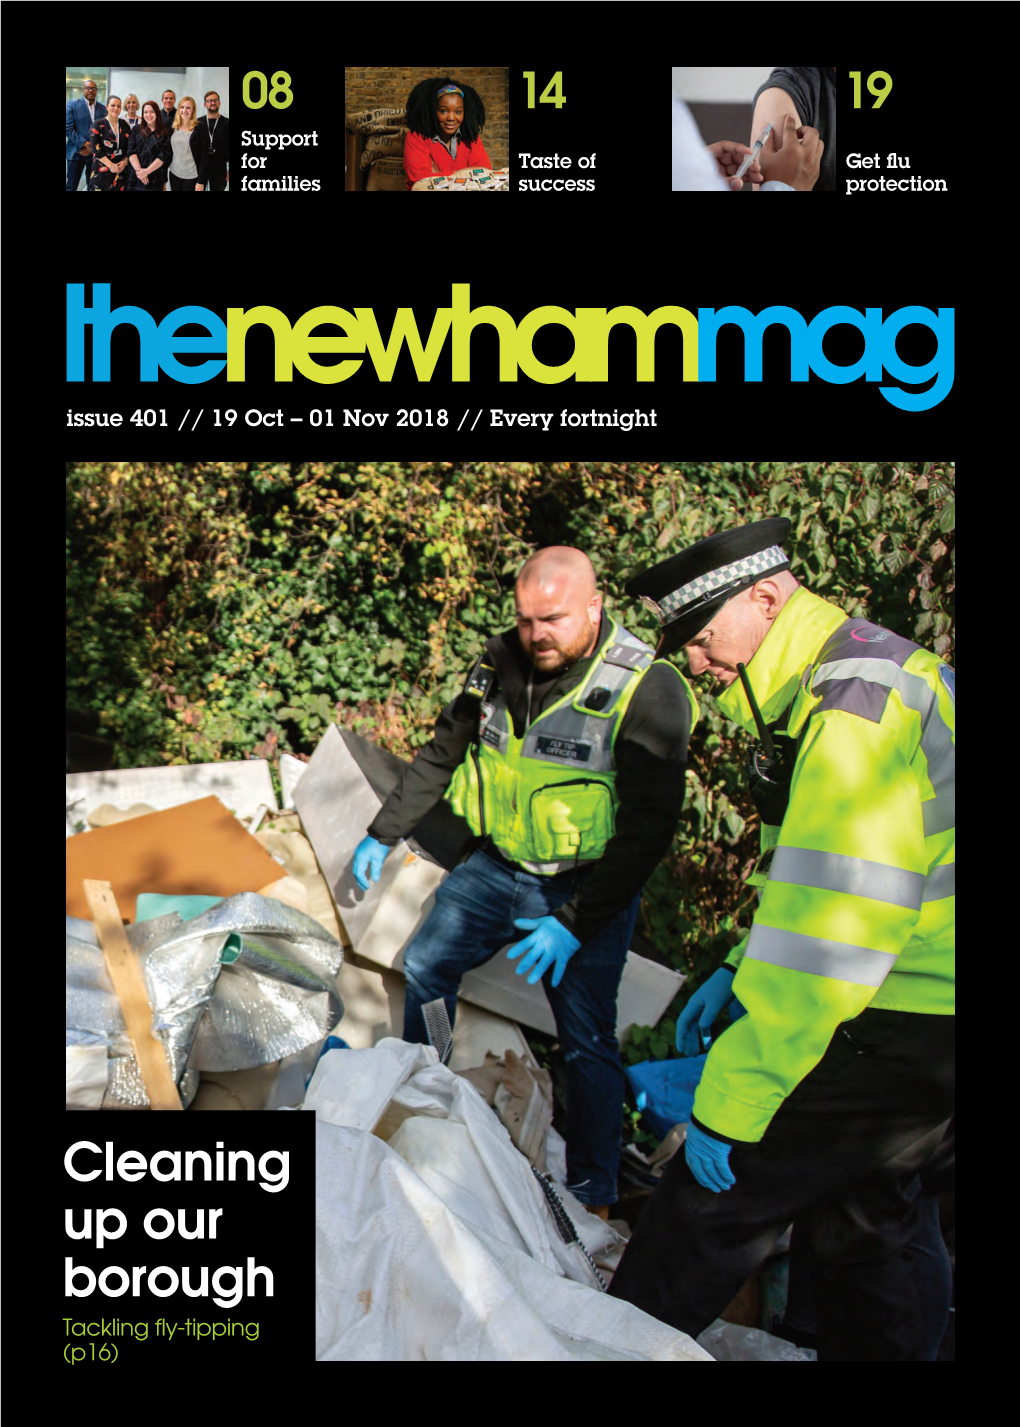 Cleaning up Our Borough Tackling Fly-Tipping (P16) Look out for the Next Issue from 2 November 2018